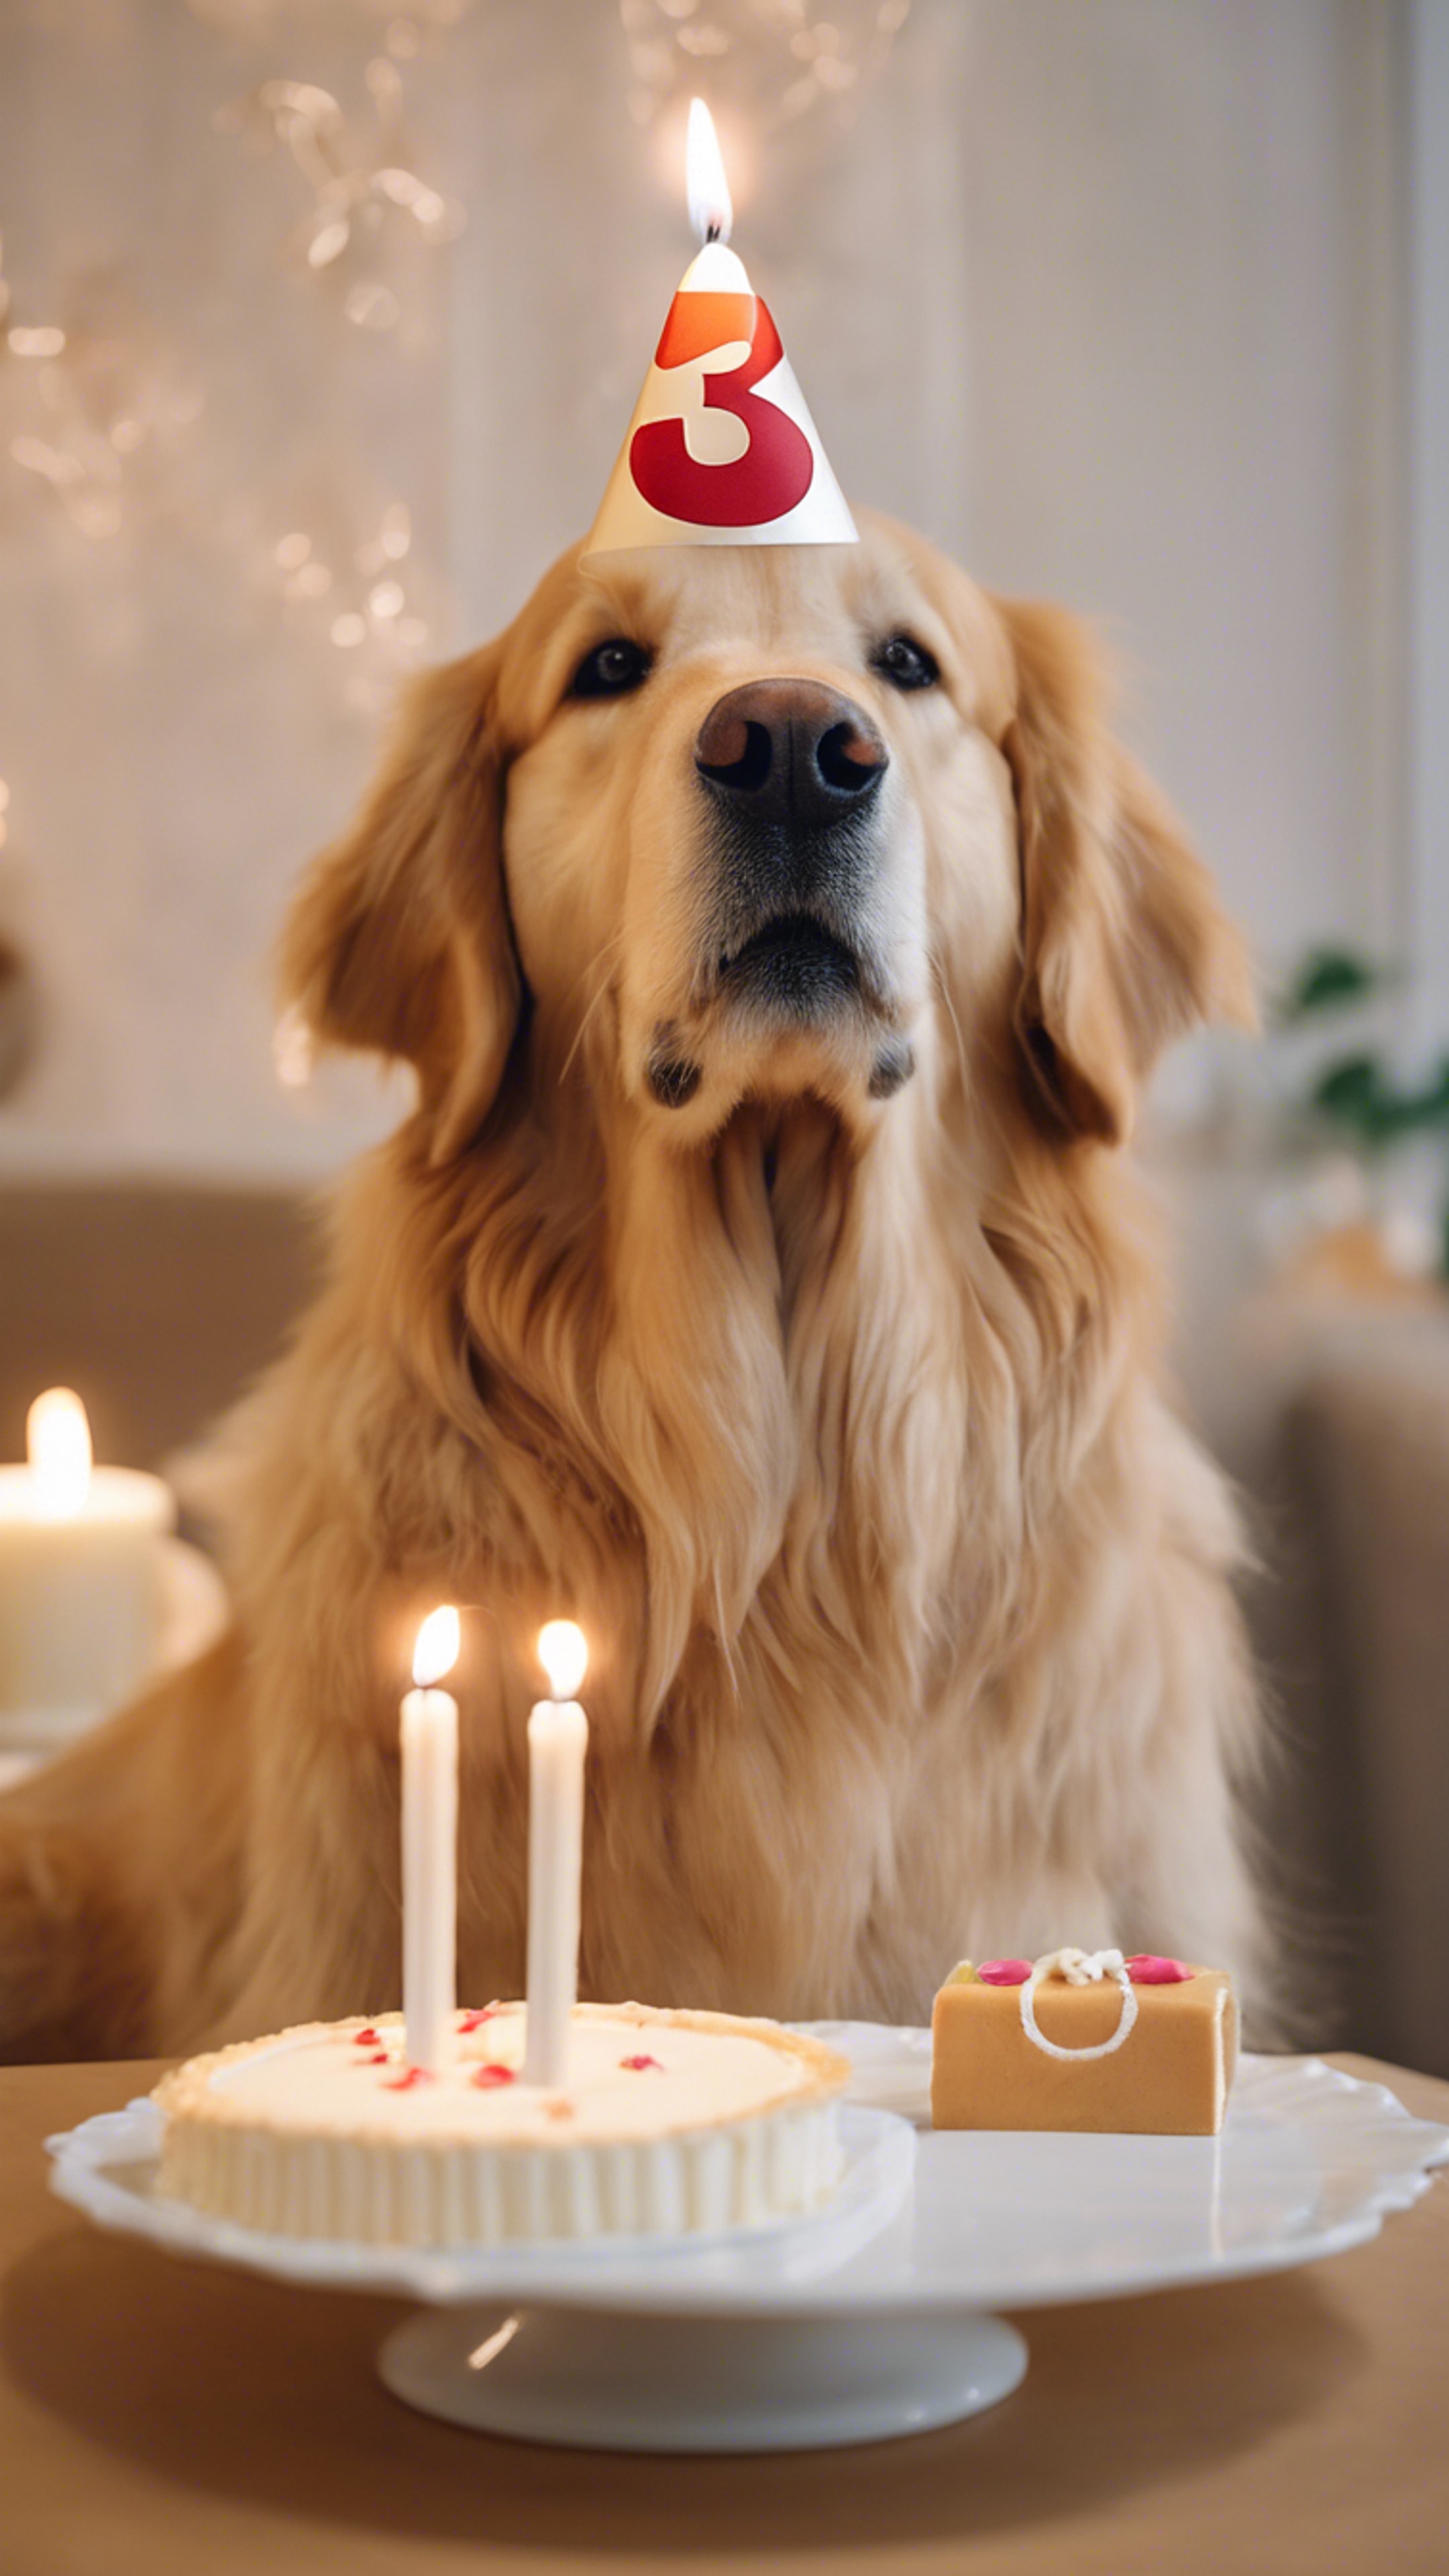 A golden retriever wearing a birthday hat, sitting in front of a numbered '3' candle on a small cake, looking eagerly at the camera. Шпалери[271fe240b95e4af1b864]